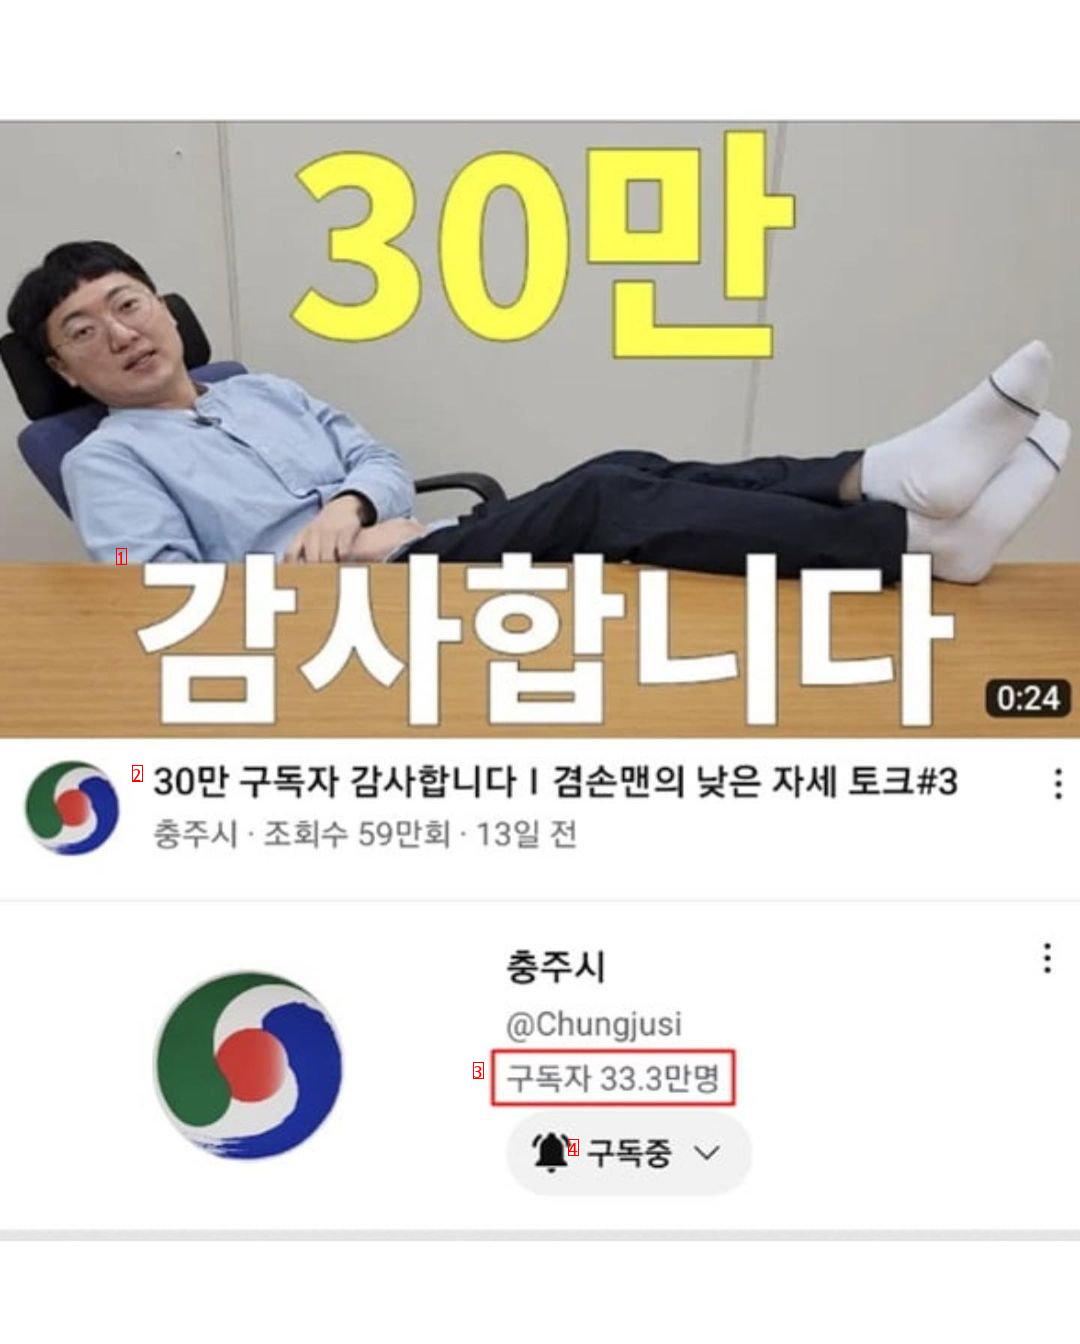 Chungju City YouTube is humble with 300,000 subscribers